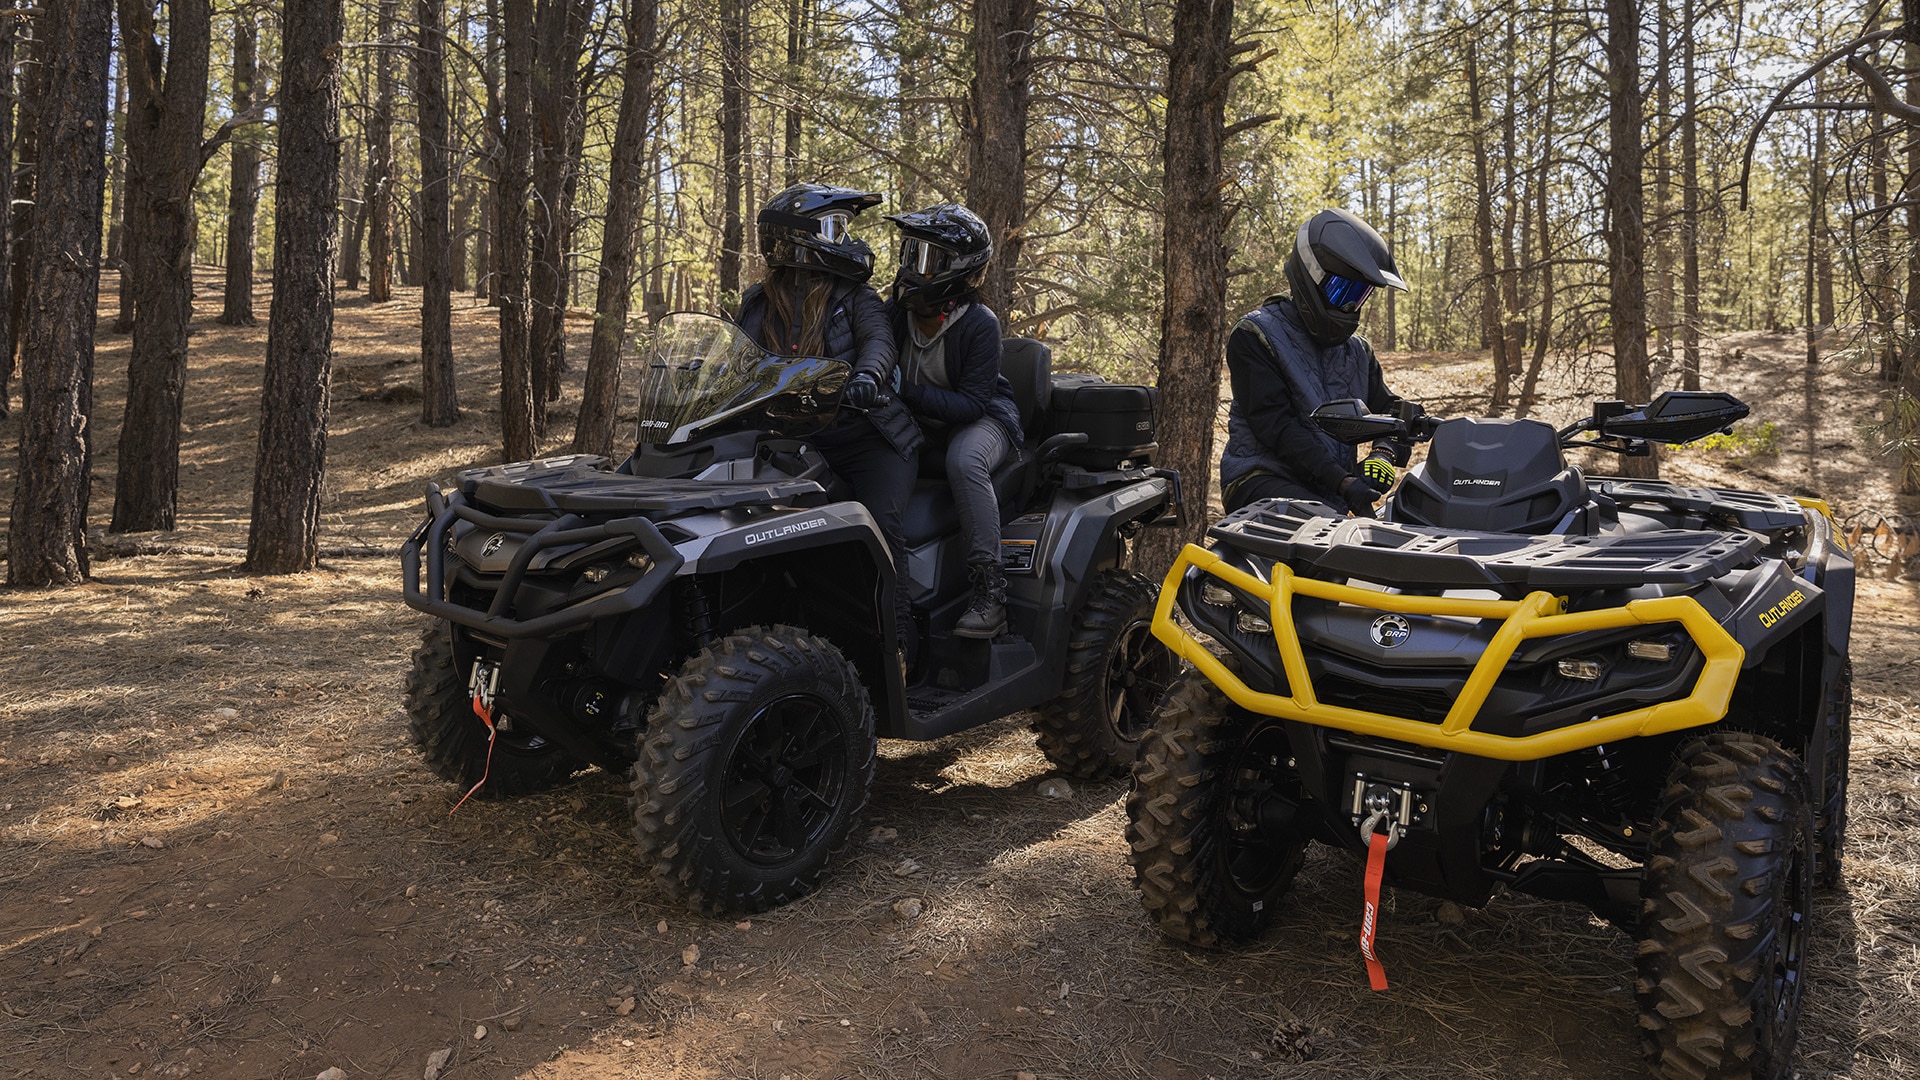 Can-Am Outlander ATV riders getting ready for a ride in the forest